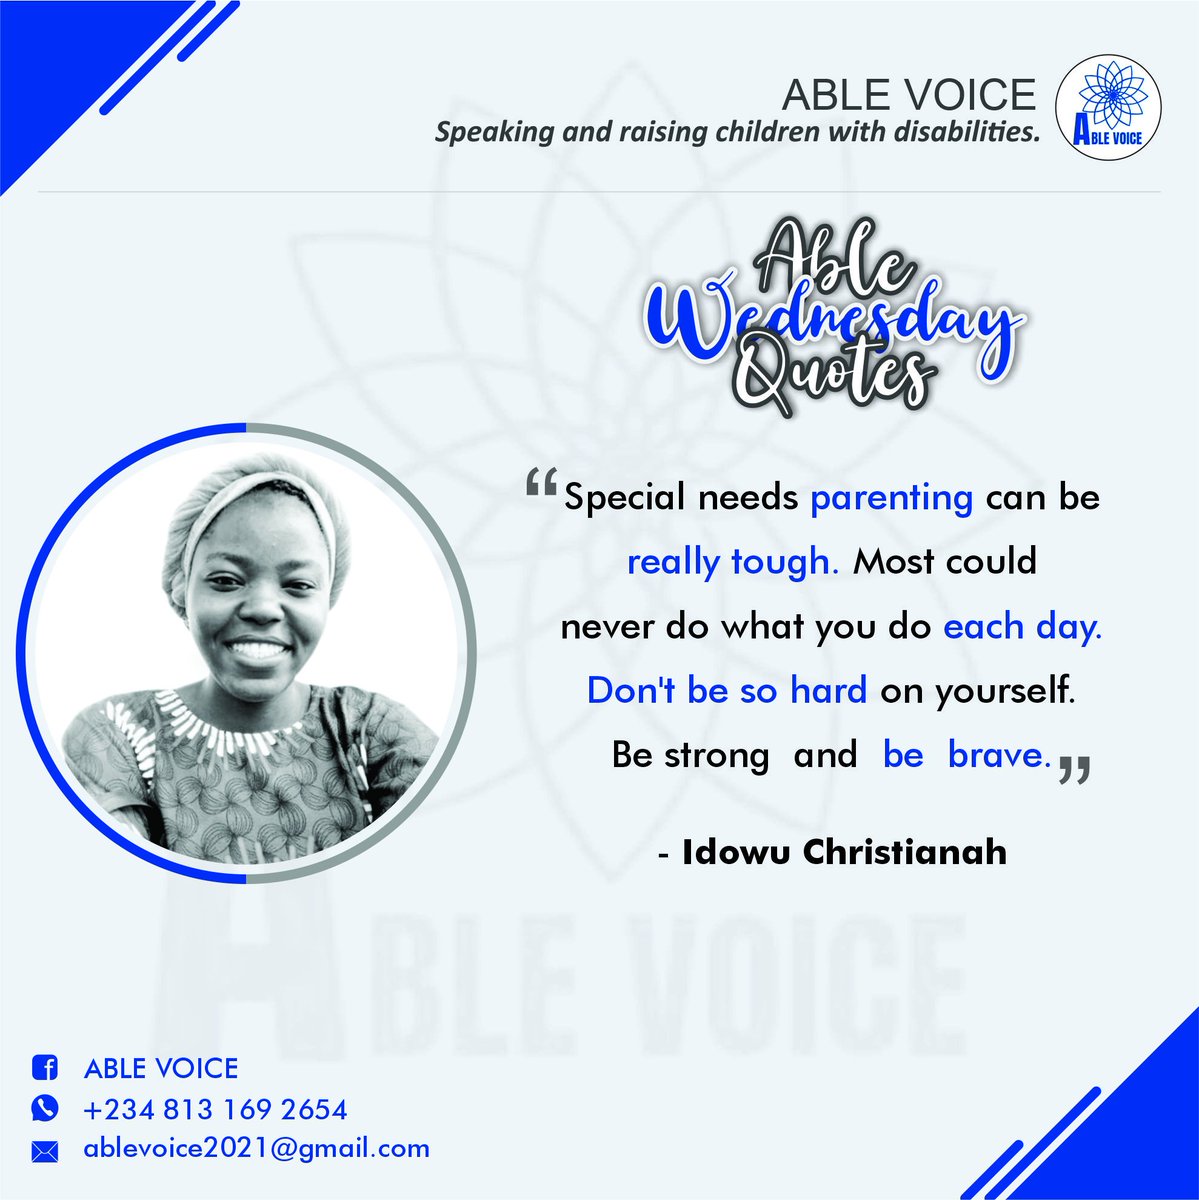 Don't be so hard on yourself. Be strong and be brave....
 #ability_in_disability #ablequote #disabilitymatters #productivity #AbleVoice #ablewednesdayquote #specialneedsparenting #advocatingforpersonswithdisability #goodparenting #comfort #hope